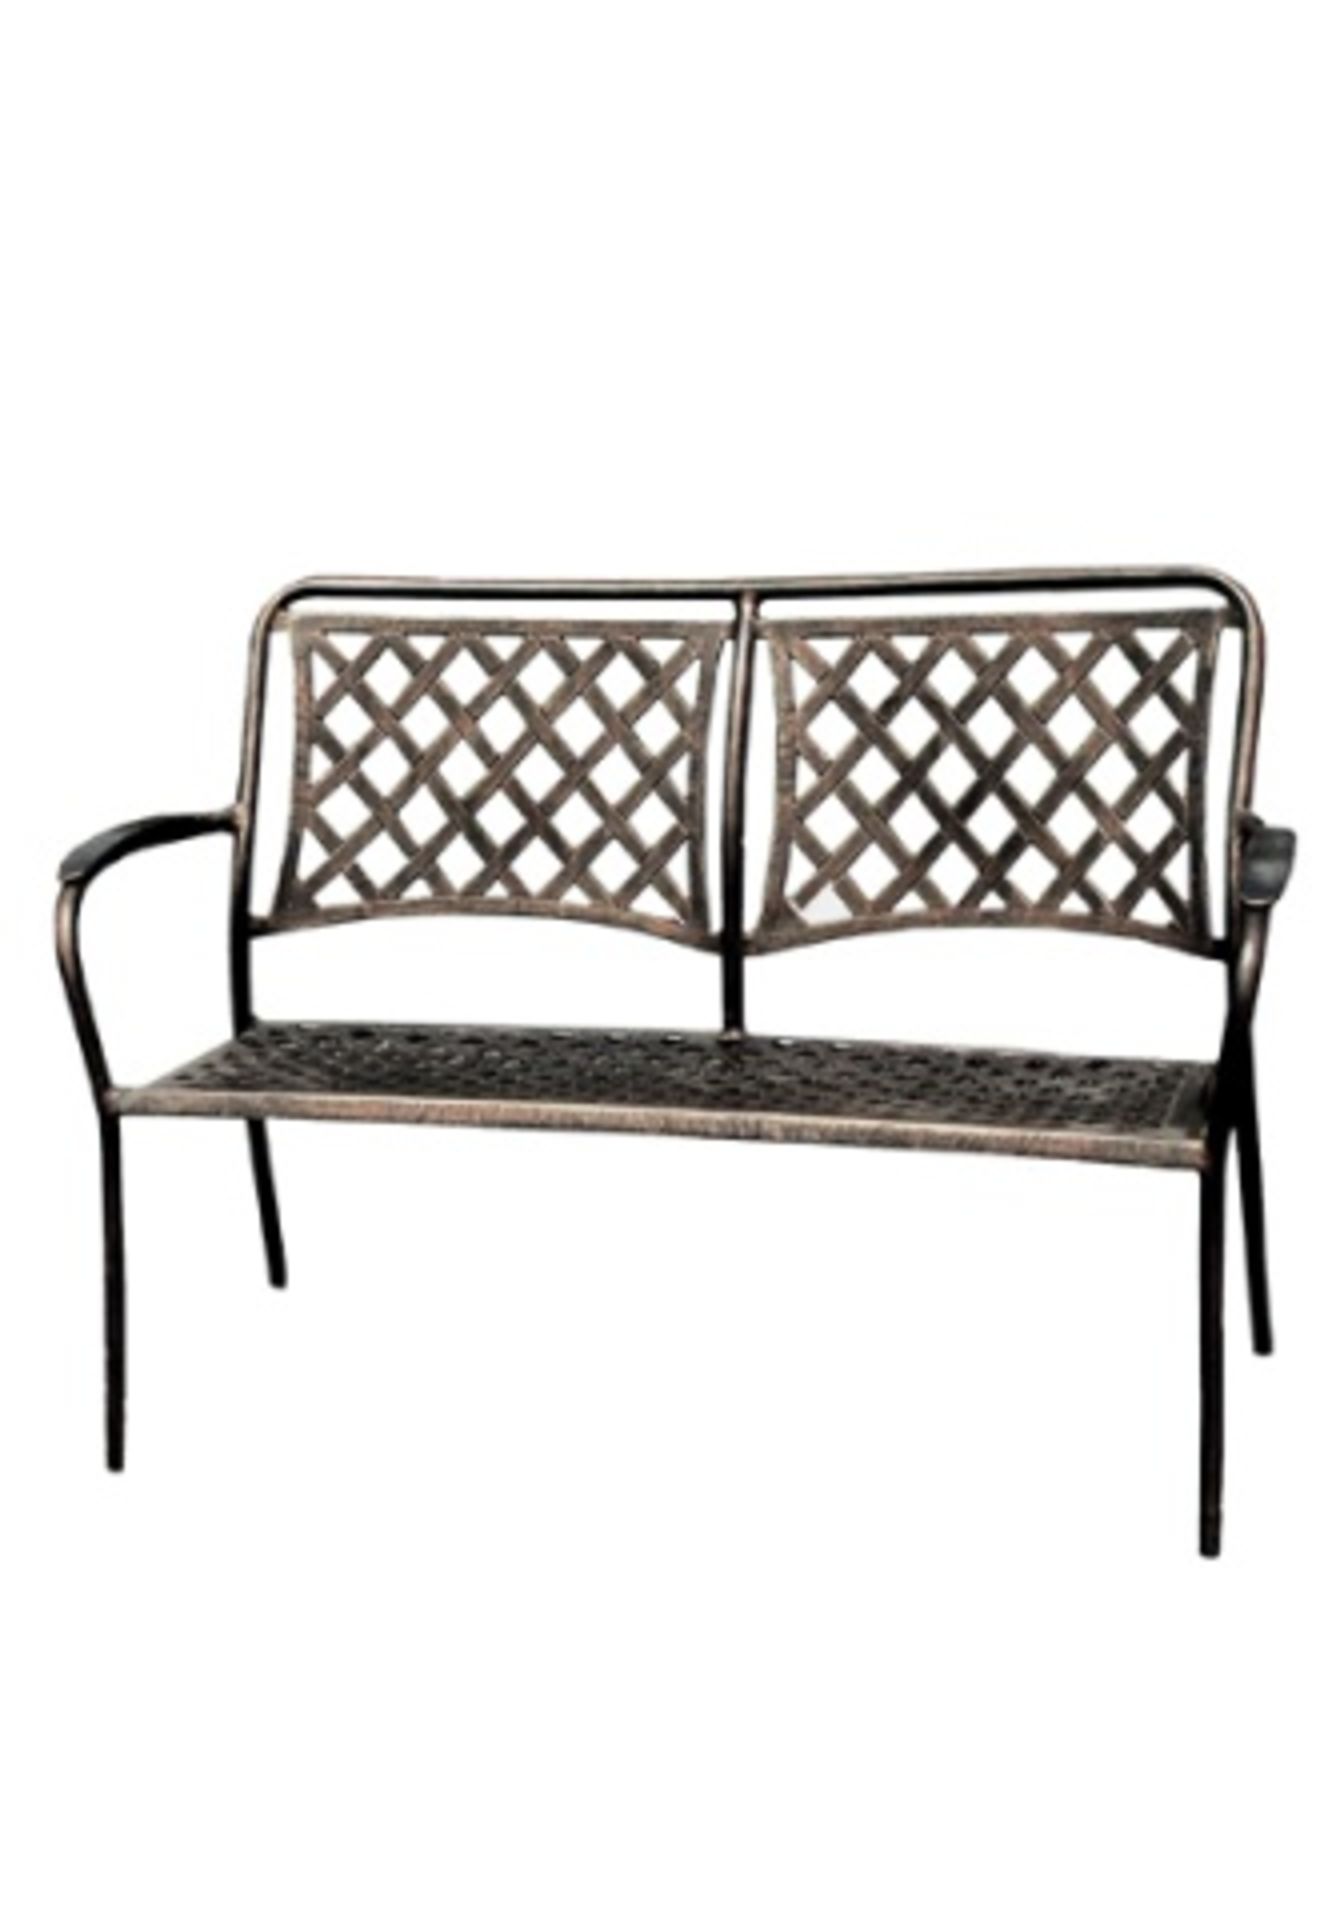 Cape Cod Outdoor Bench. Cast and tubular welded aluminum powder coated hand decorated to an